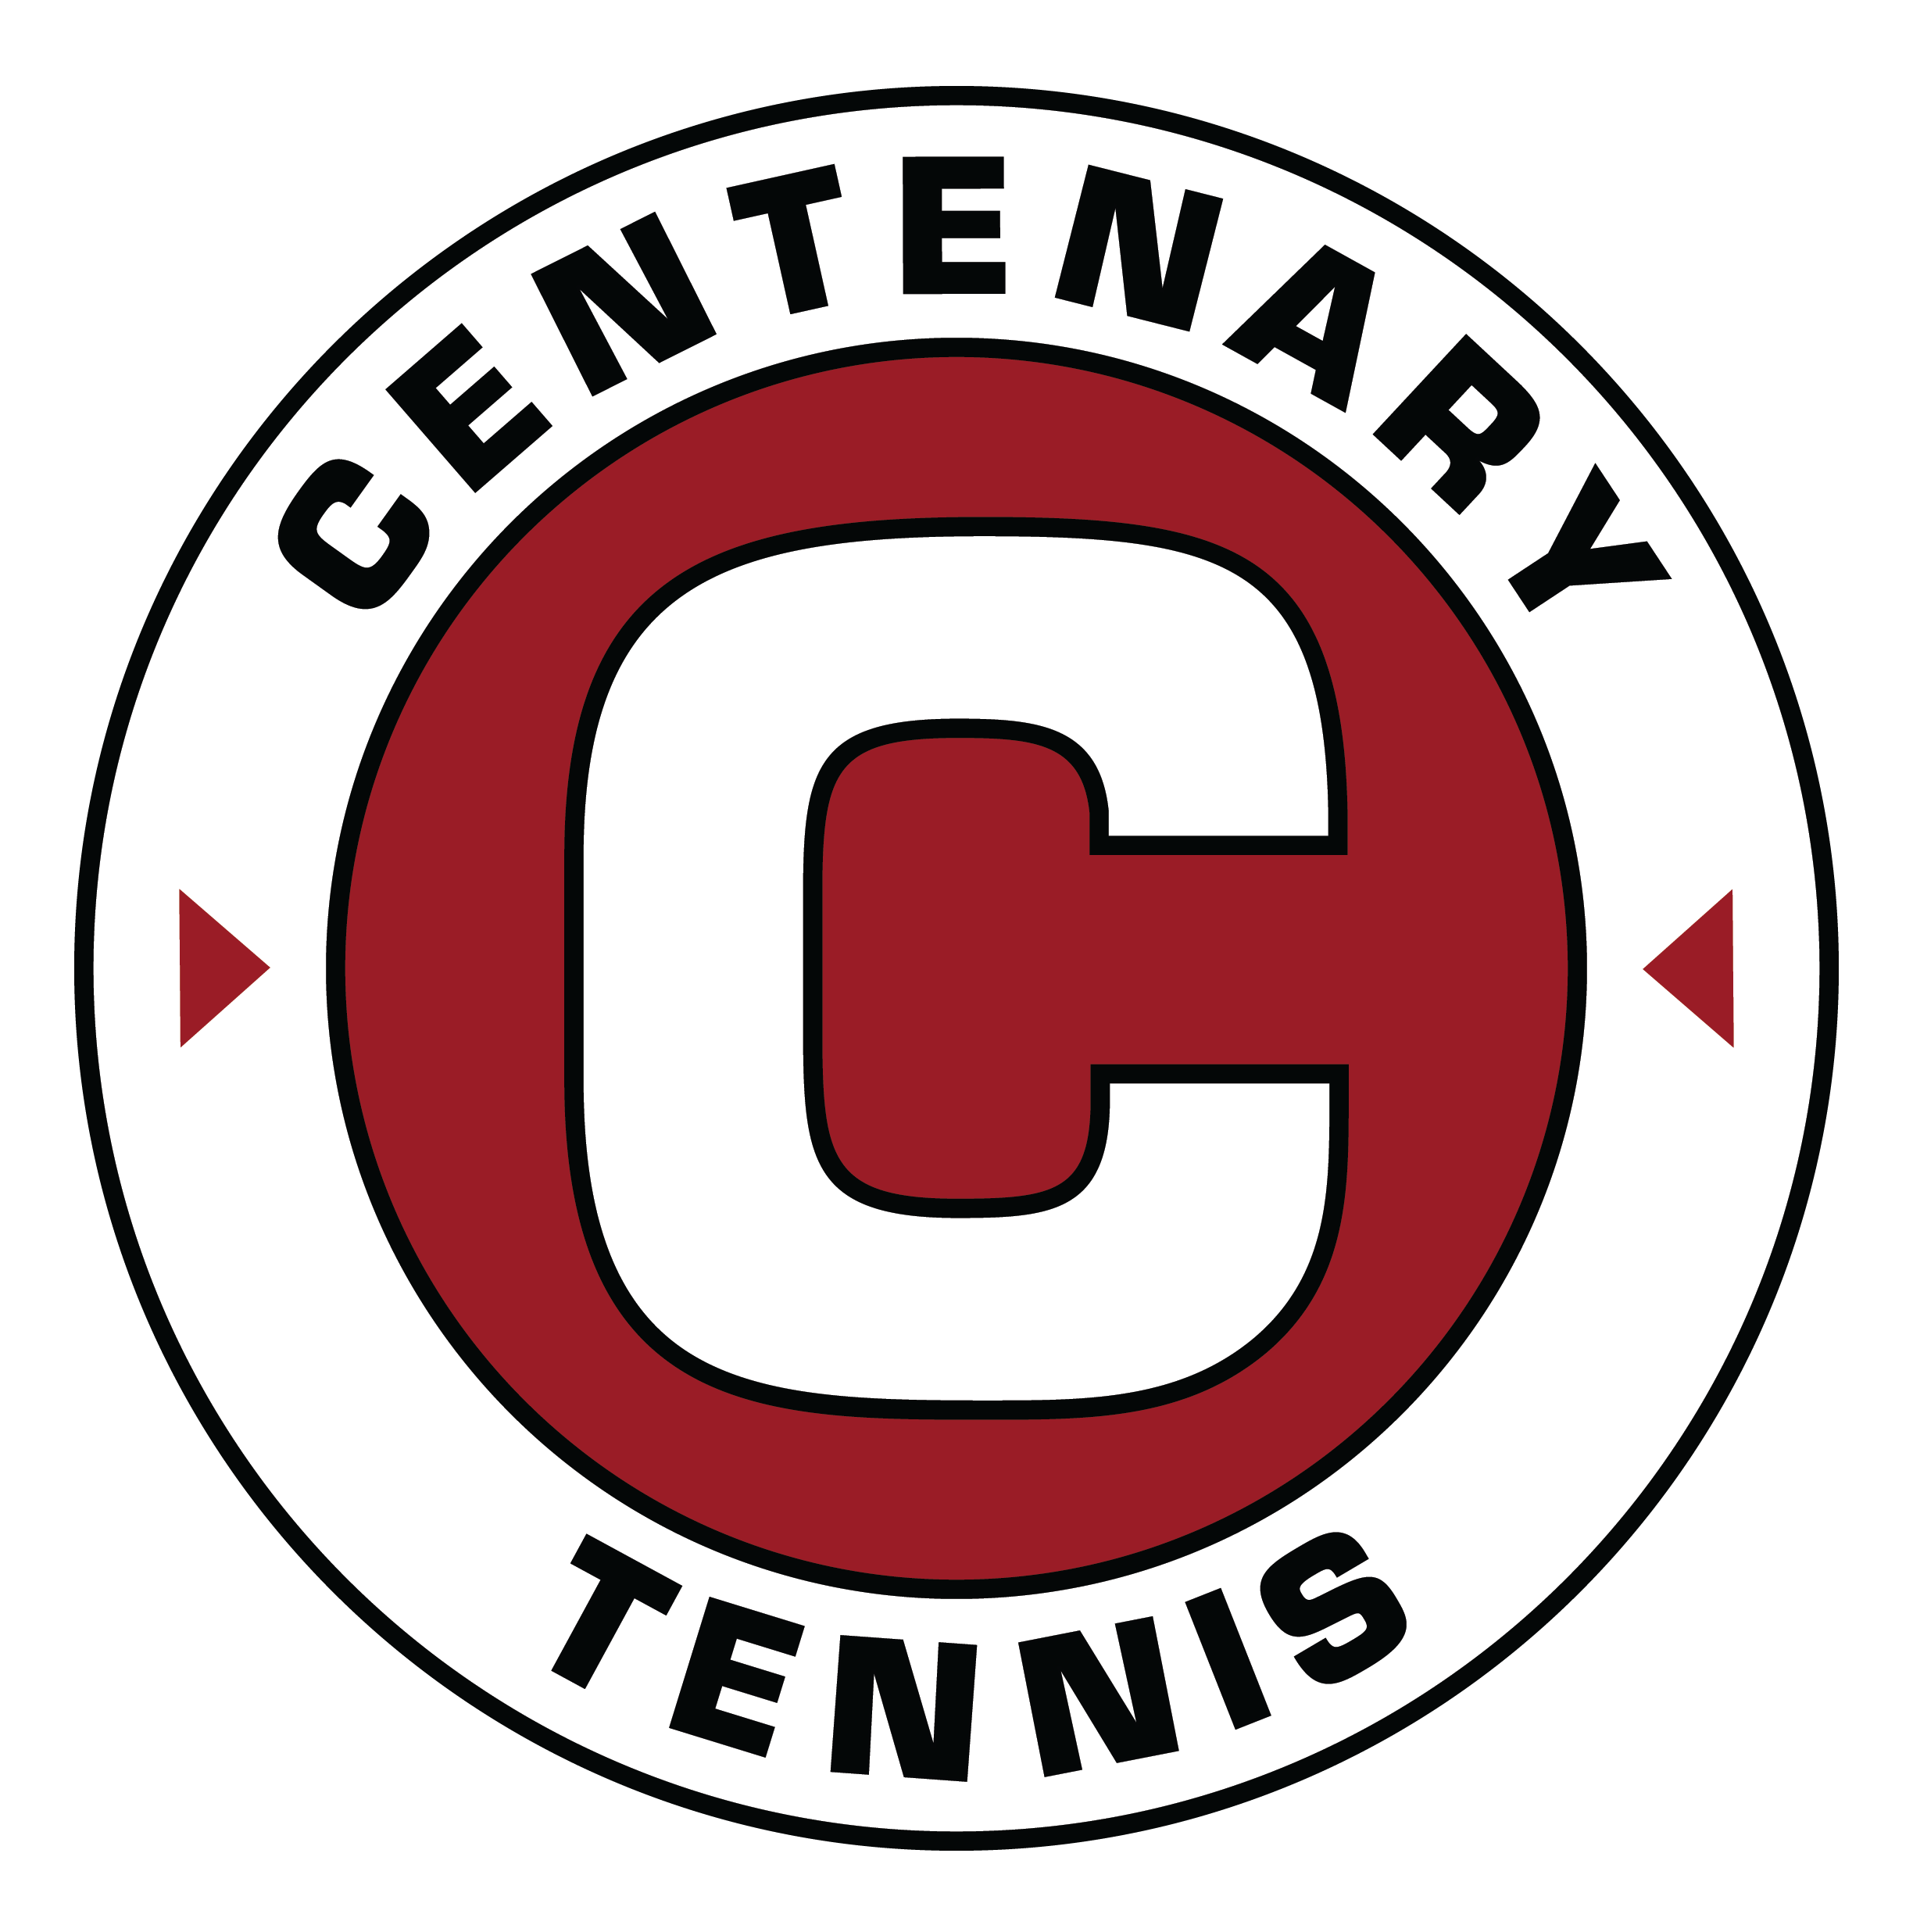 Centenary Tennis: Rising from the Ashes ft. Chris Dudley & David Orr